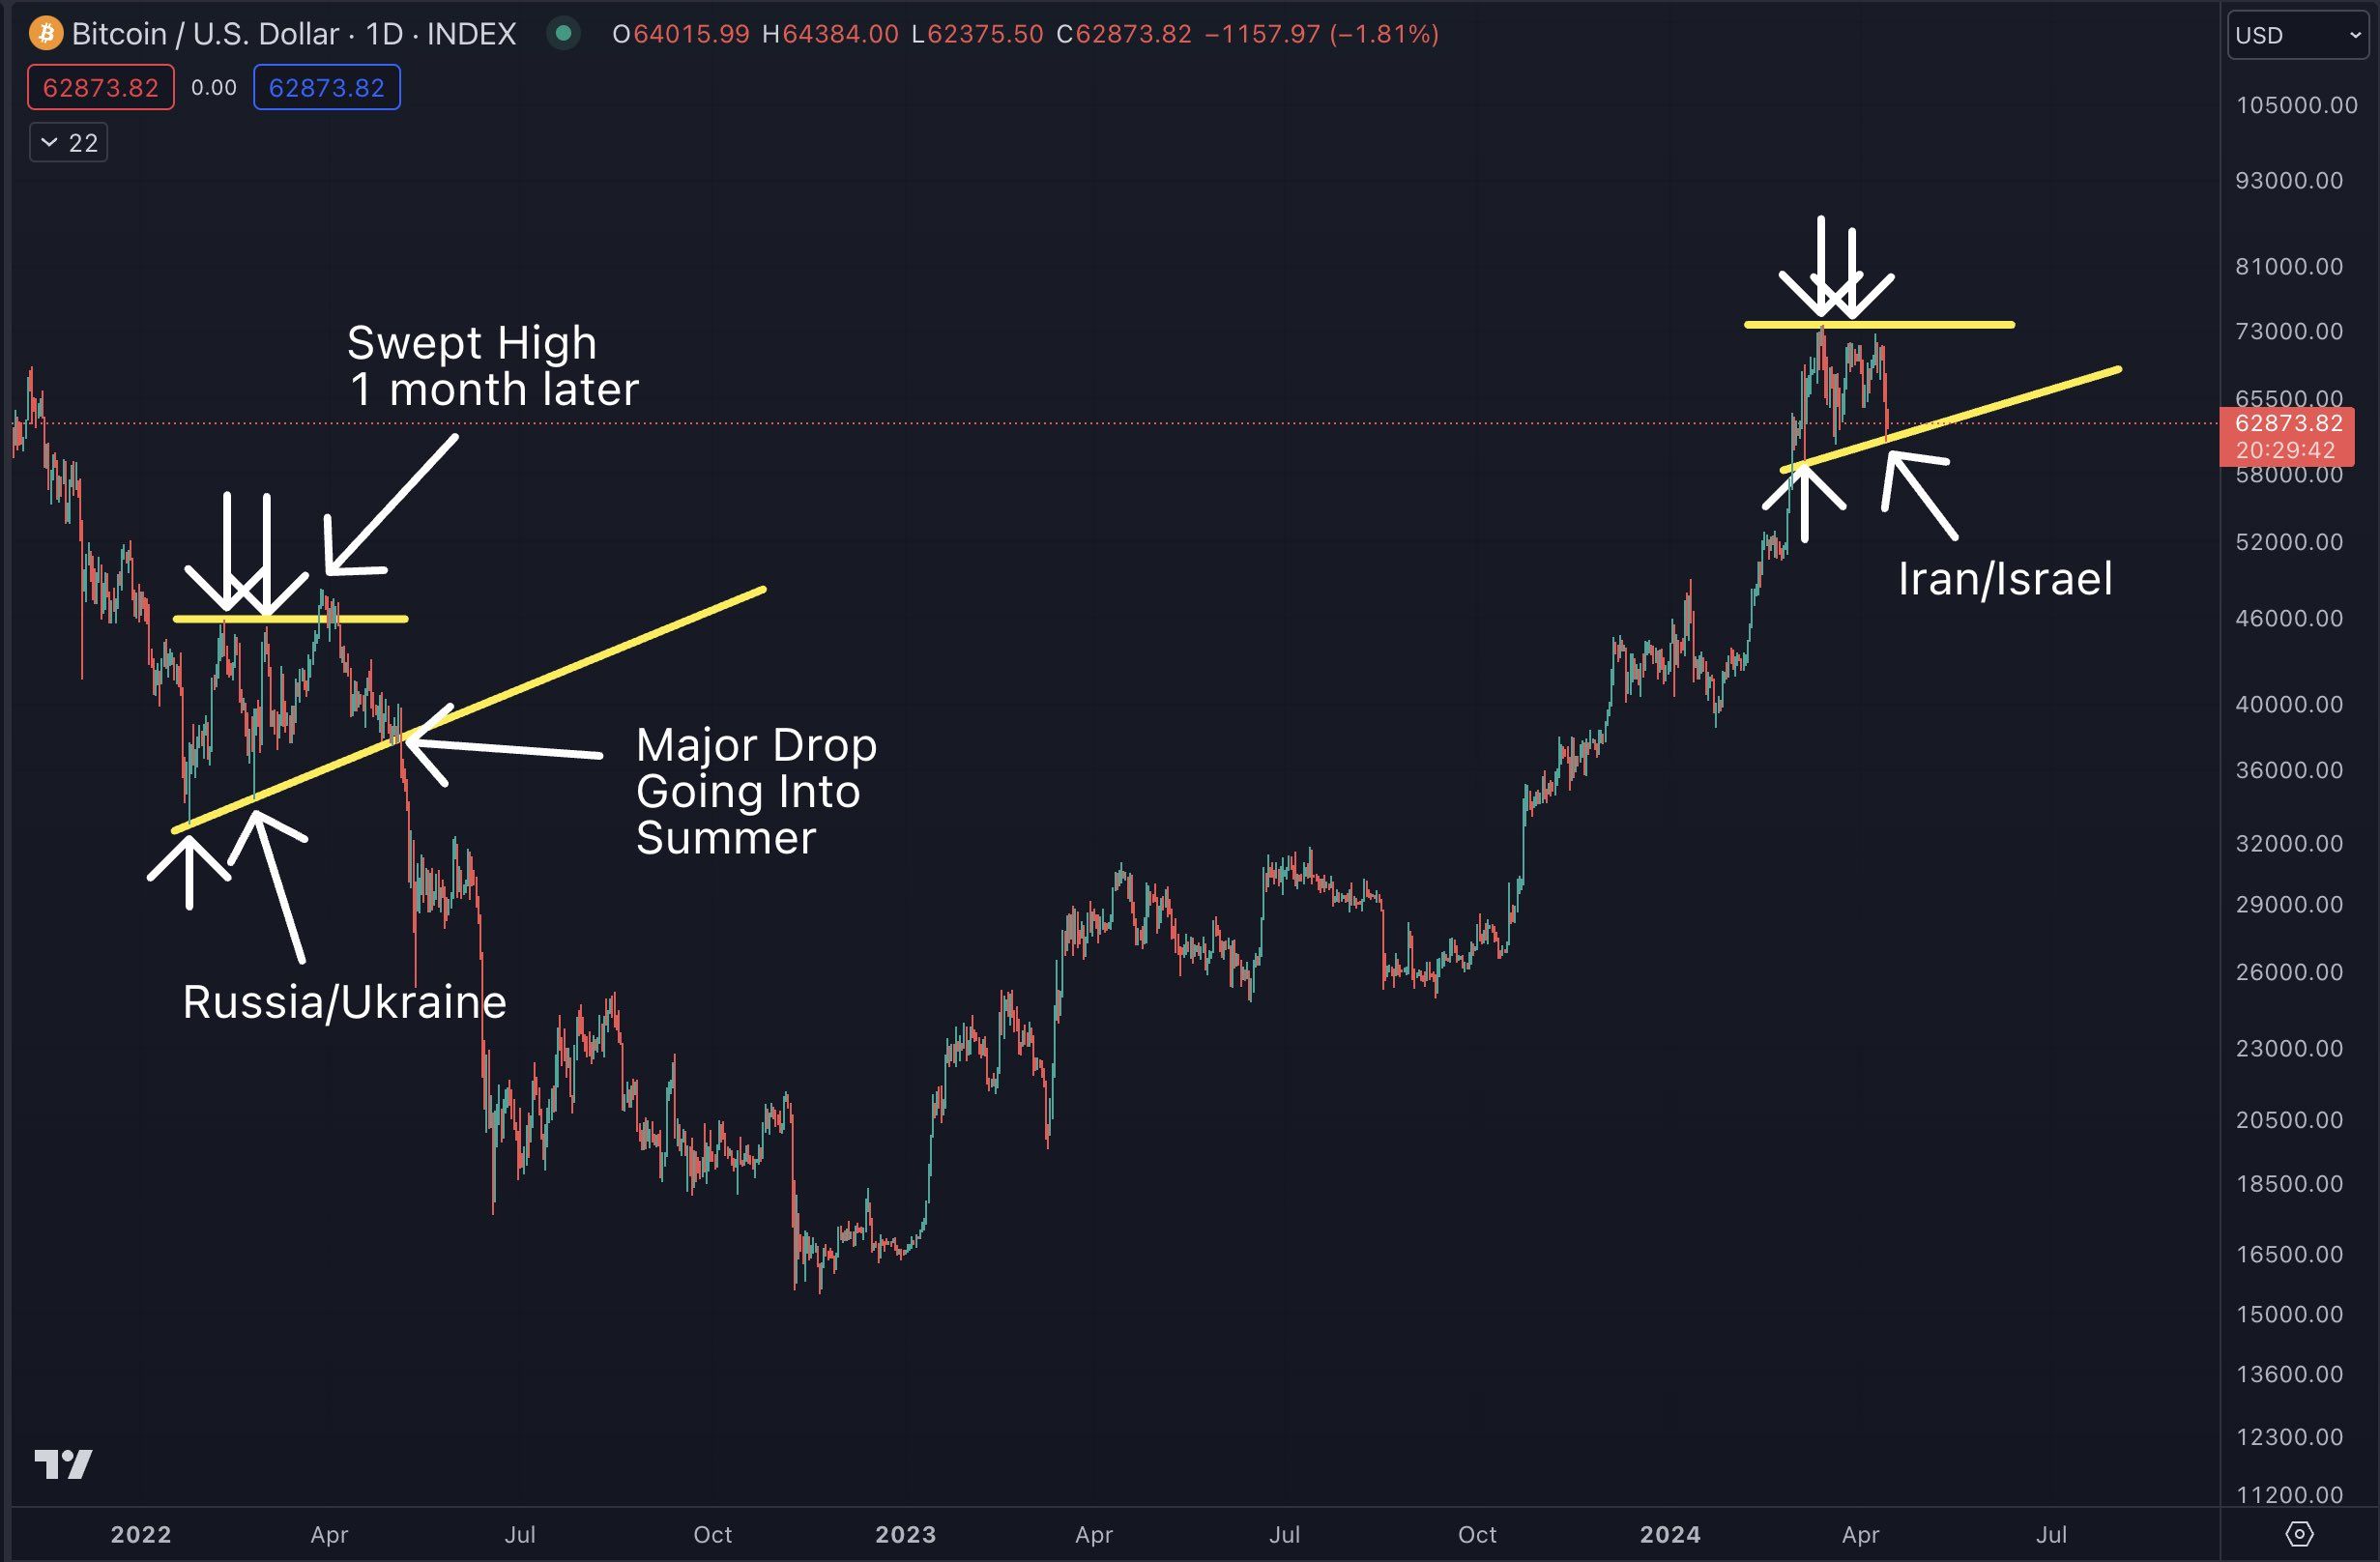 Compare Bitcoin fluctuations with the Russia-Ukraine conflict event.